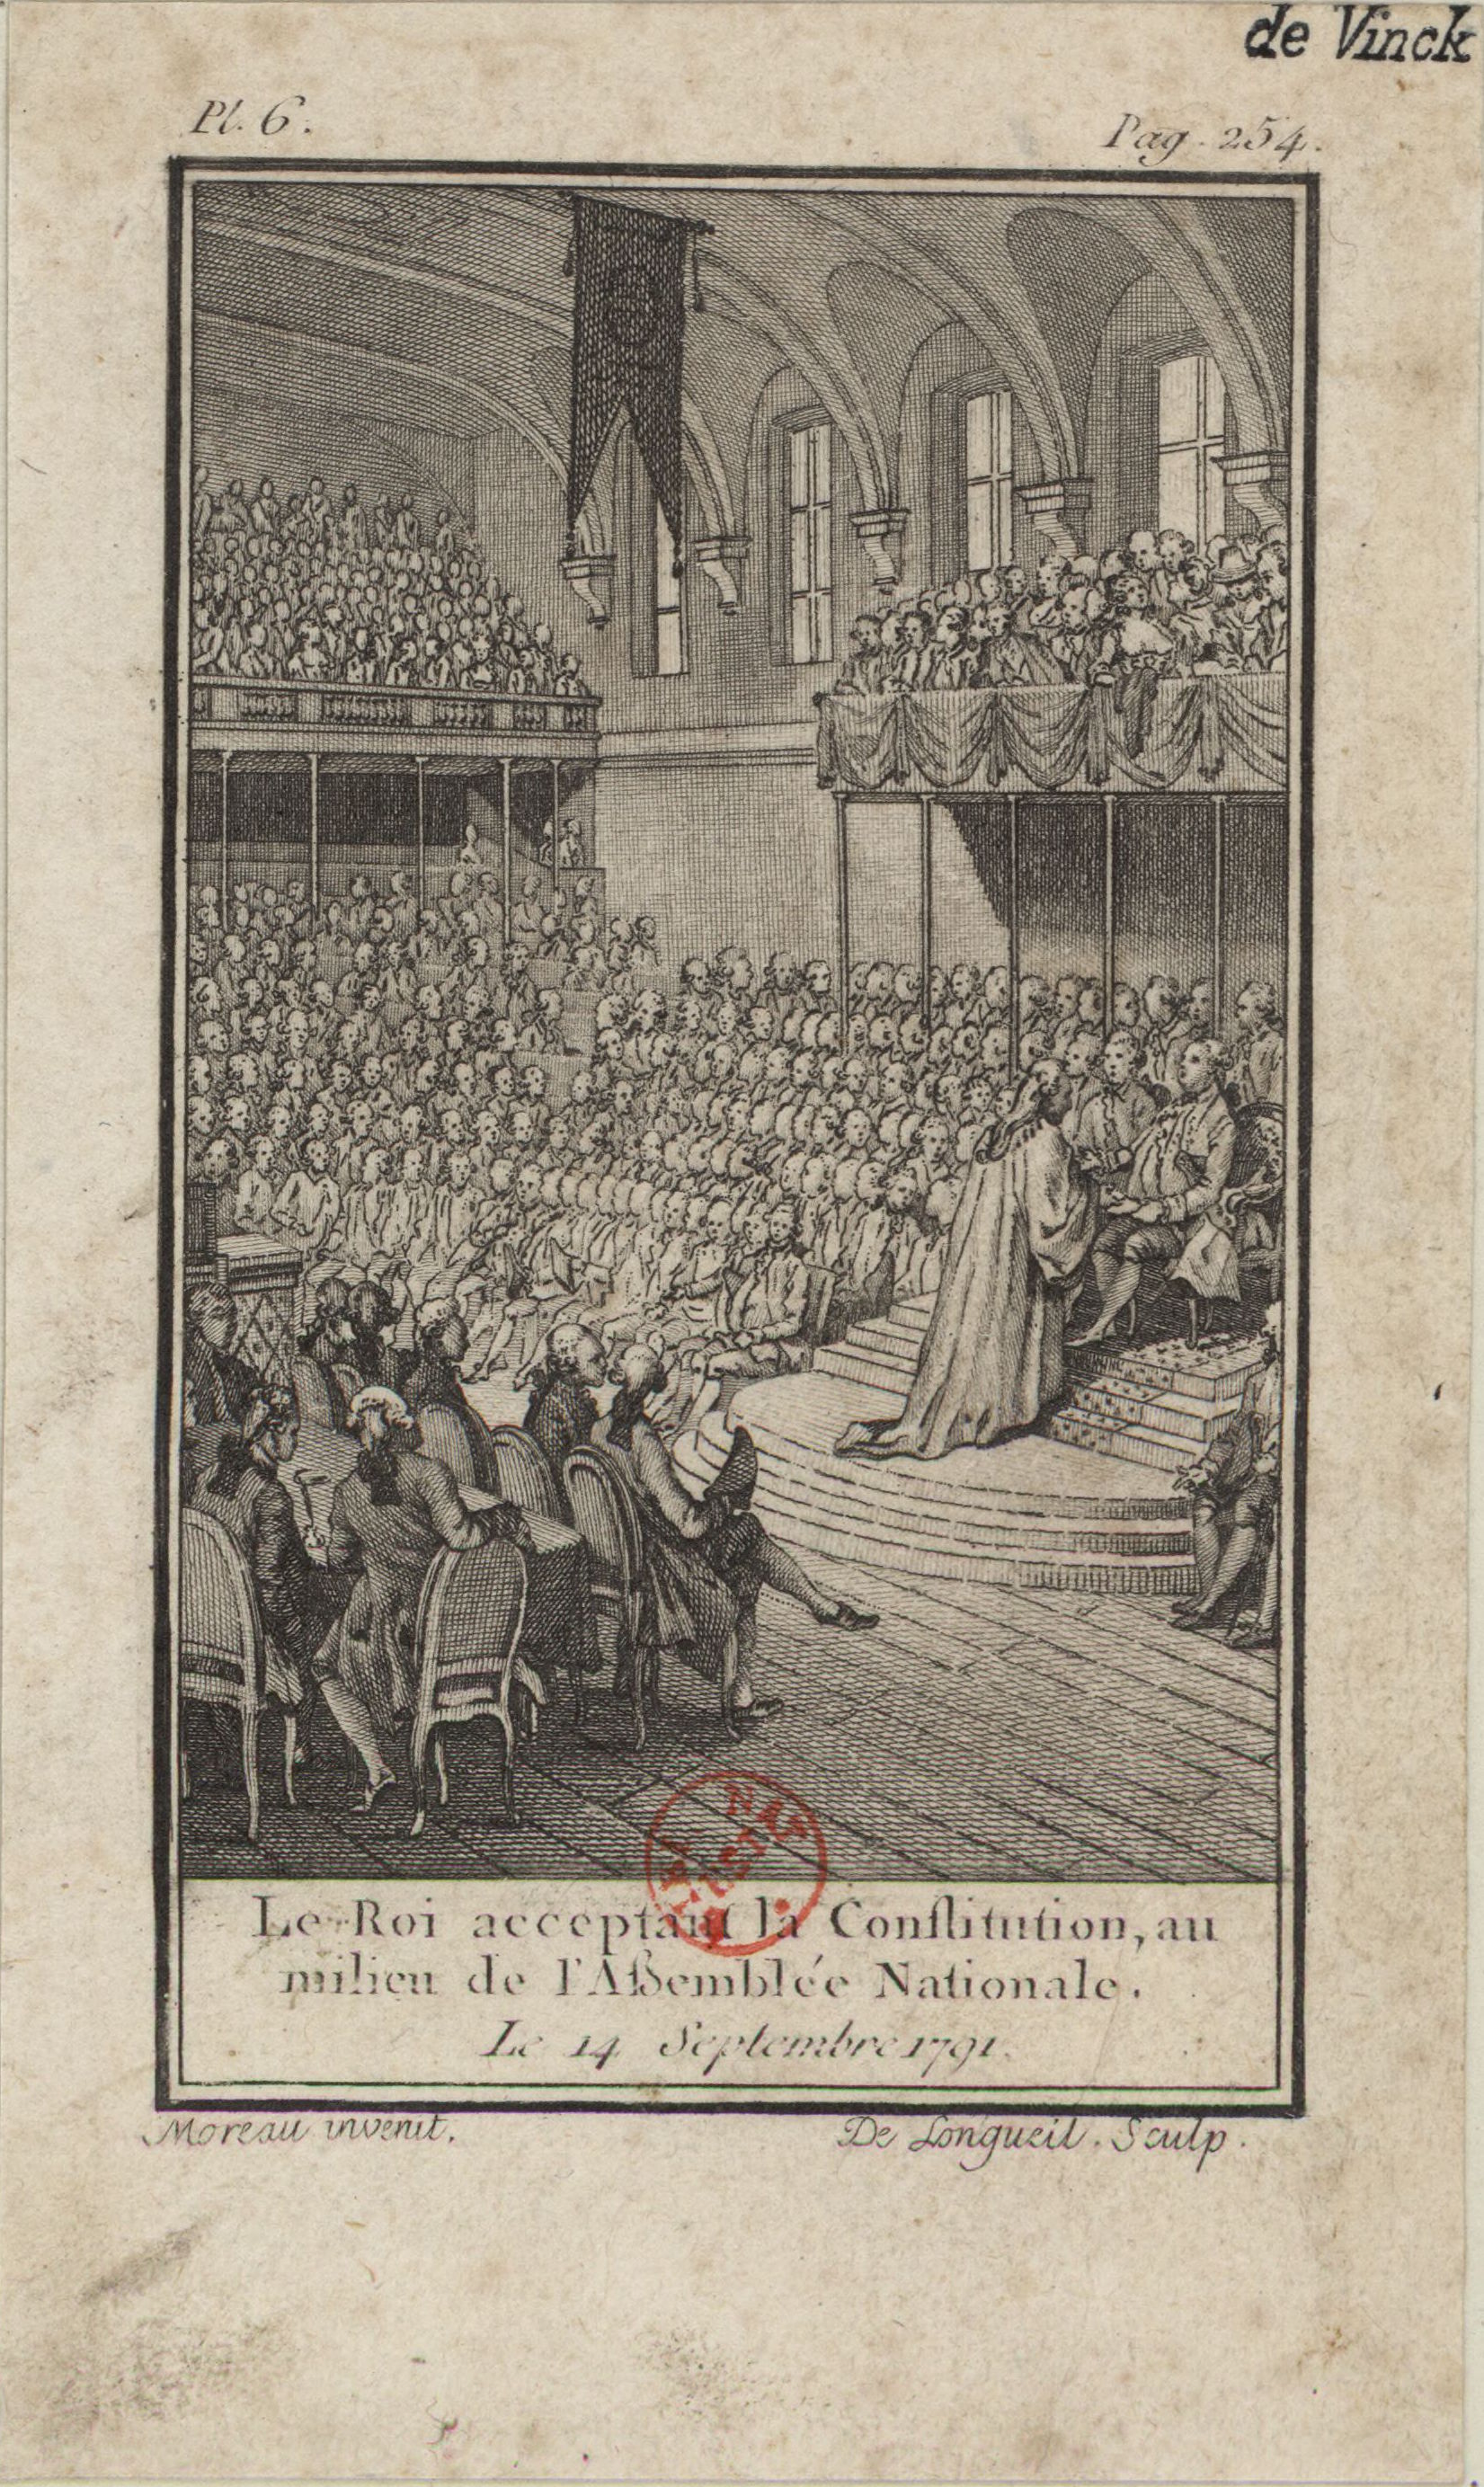 Engraving of the king of France accepting the constitution of the National Assembly